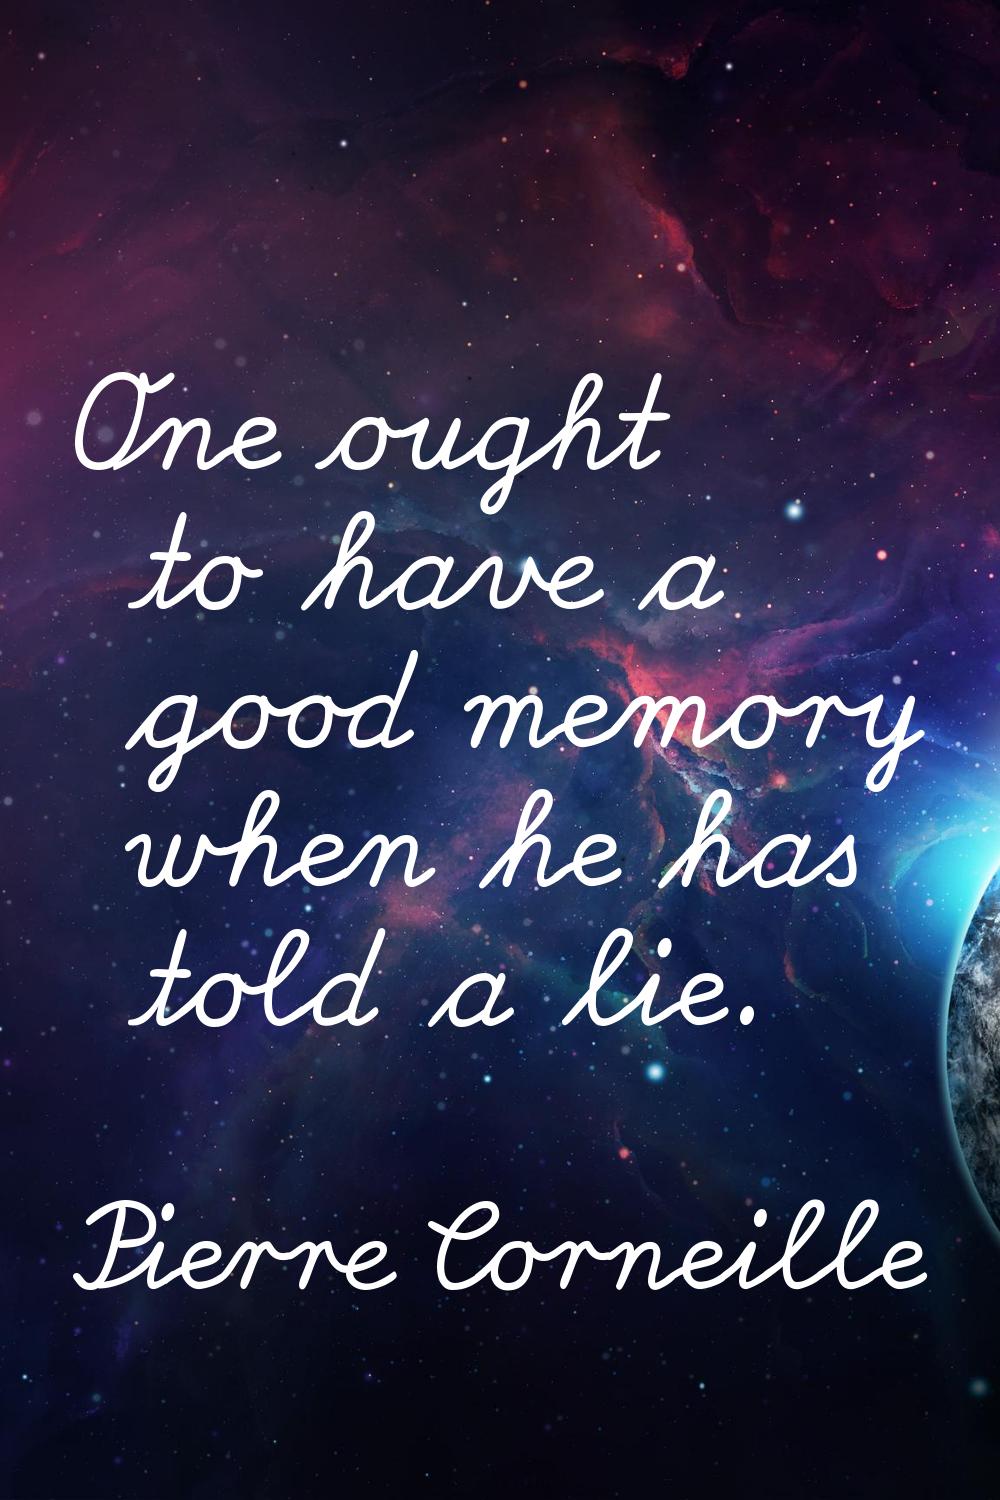 One ought to have a good memory when he has told a lie.